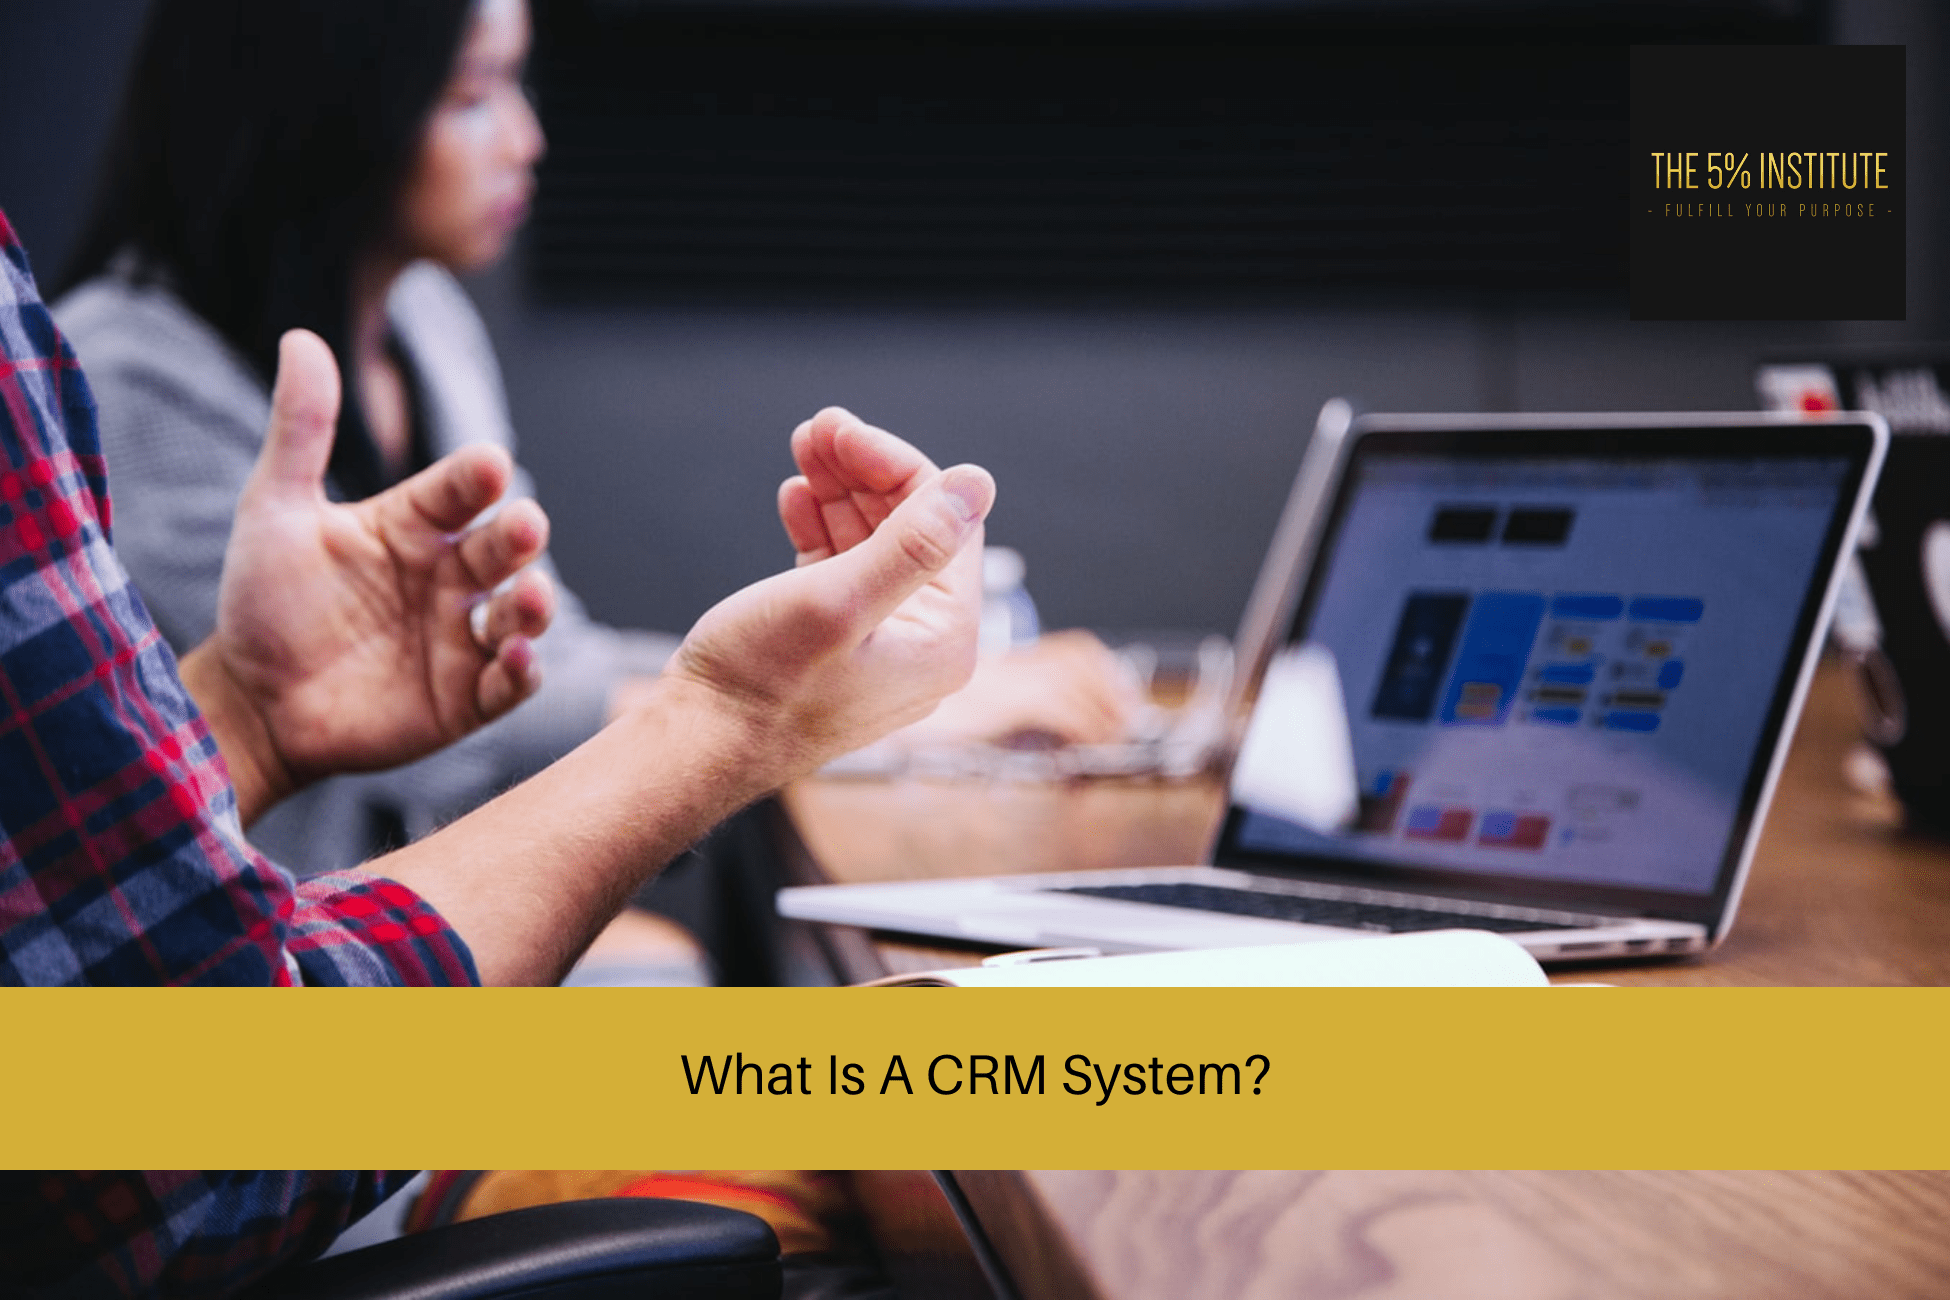 What Is A CRM System